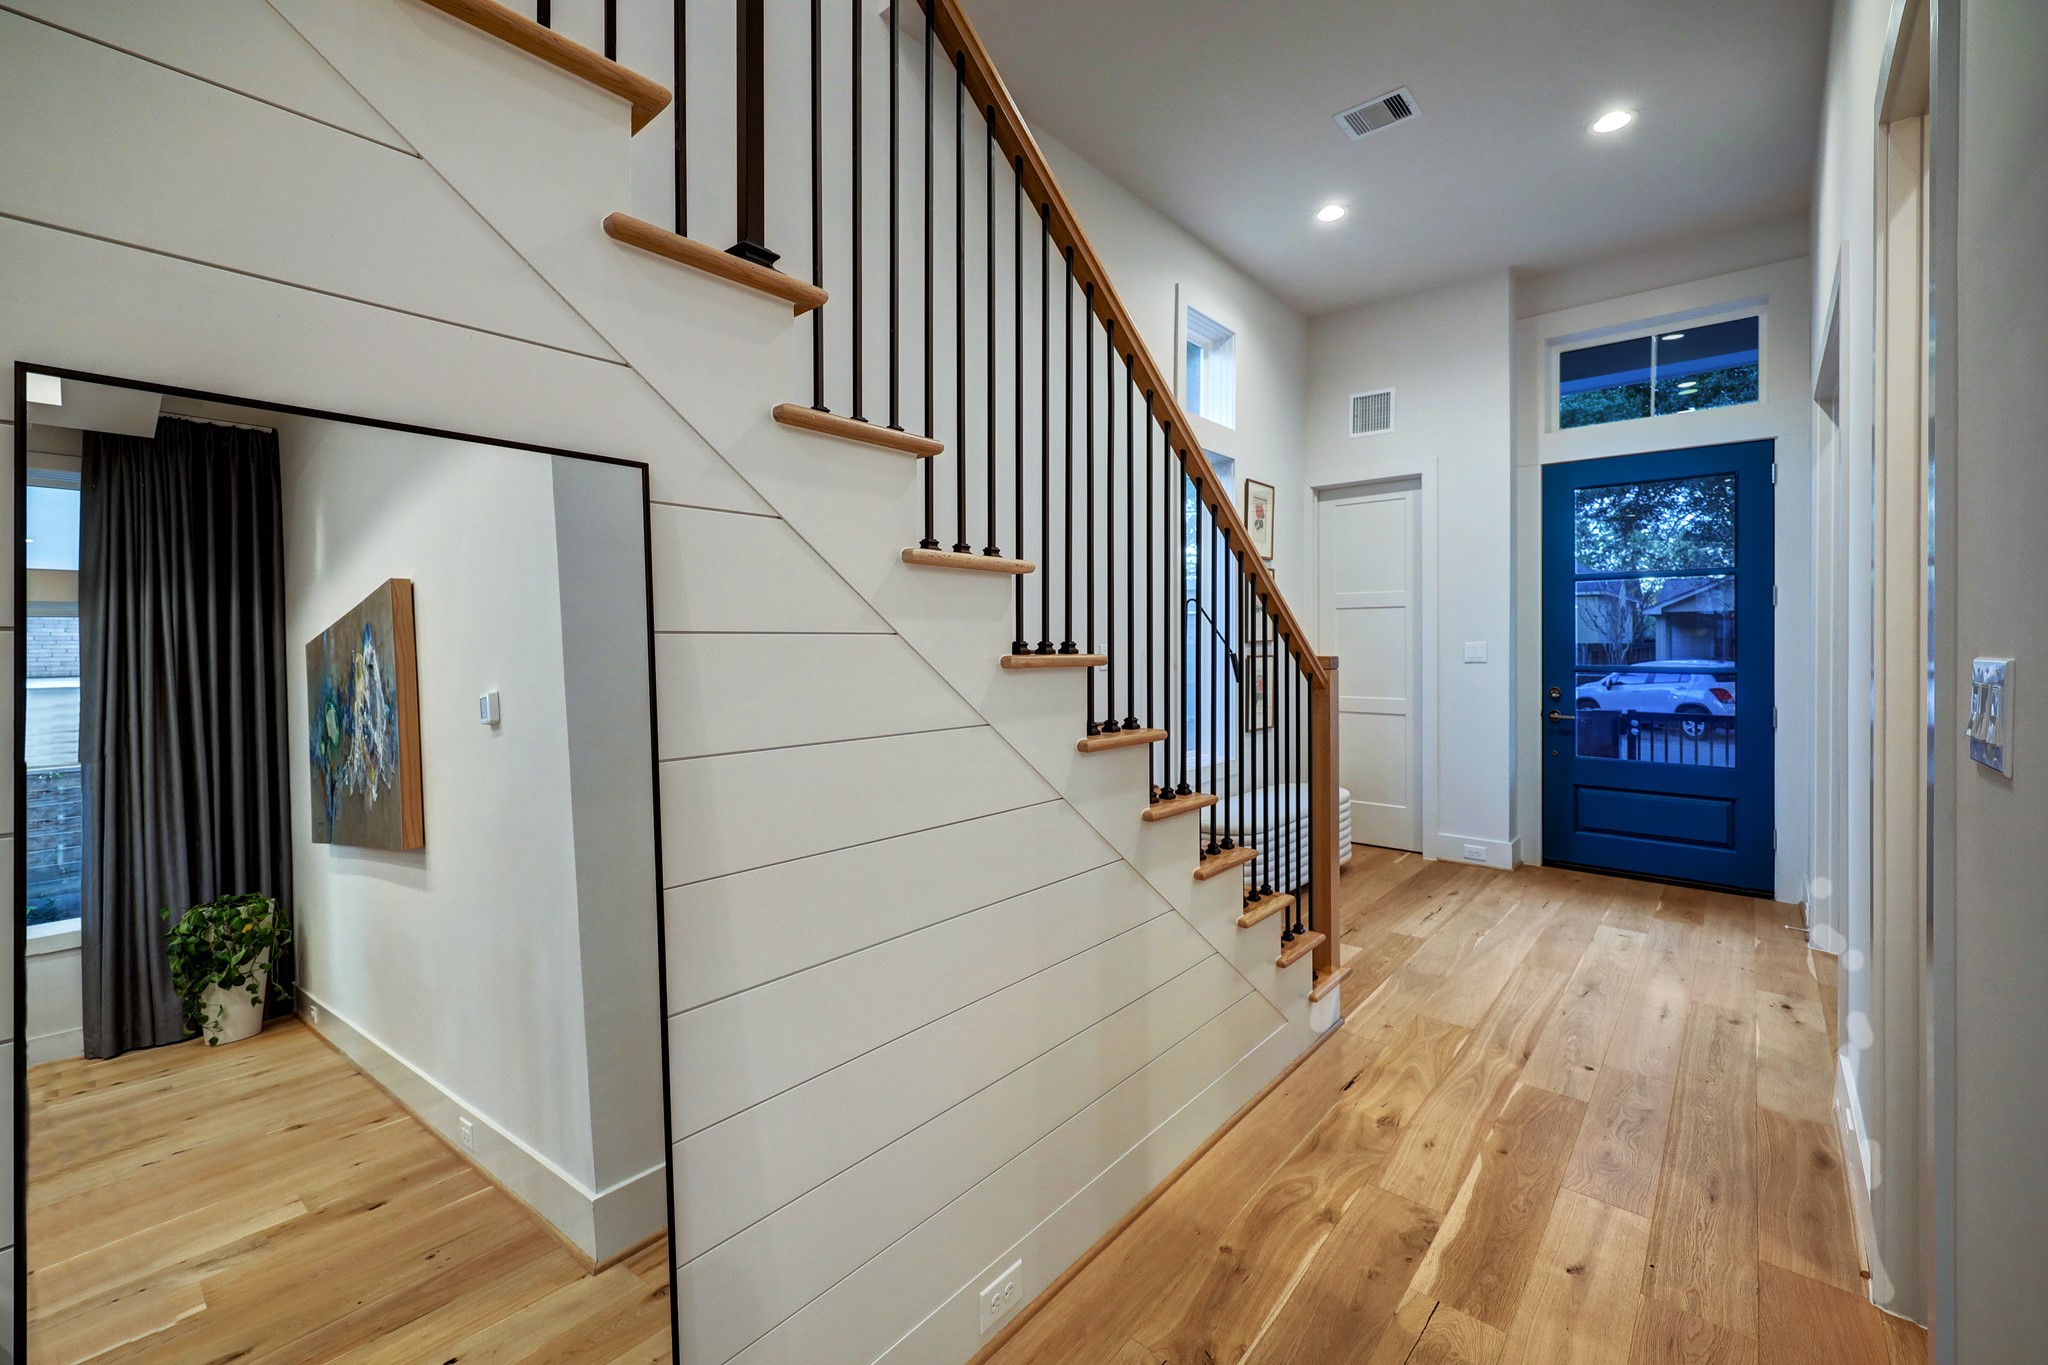 Thoughtful details like an oversized coat closet, transom window and shiplap feature wall add warmth and convenience to this incredibly welcoming home.